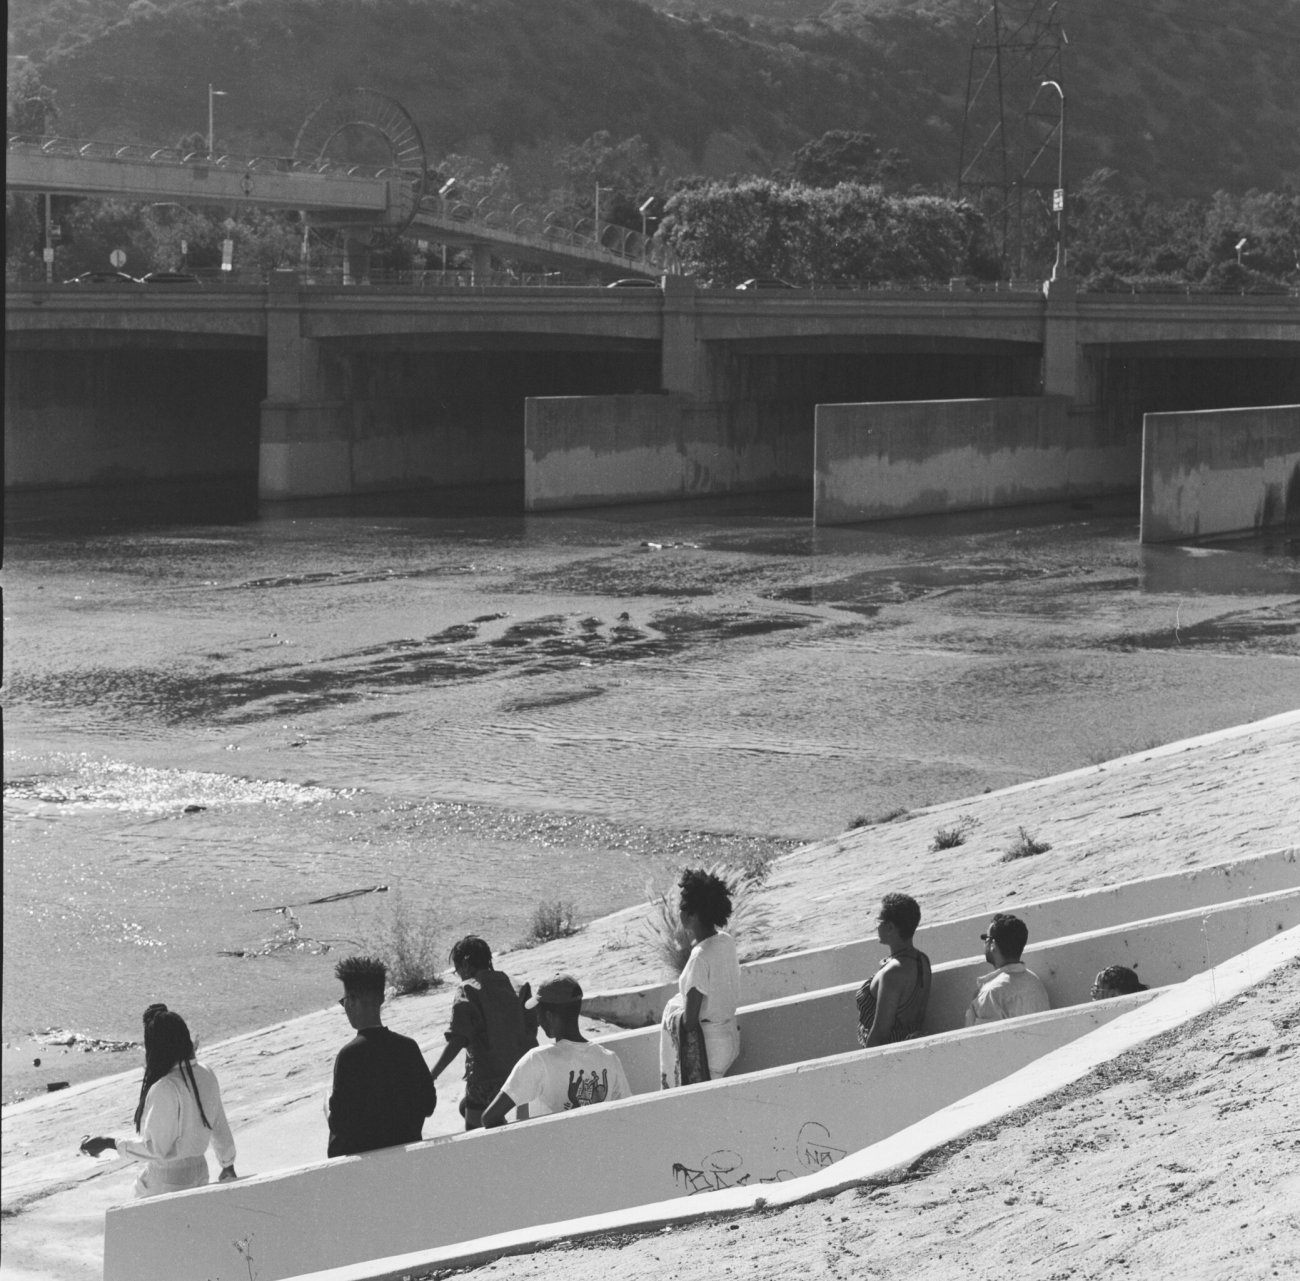 Black and white image still of a group of people seen from a distance looking out onto a reservoir. 